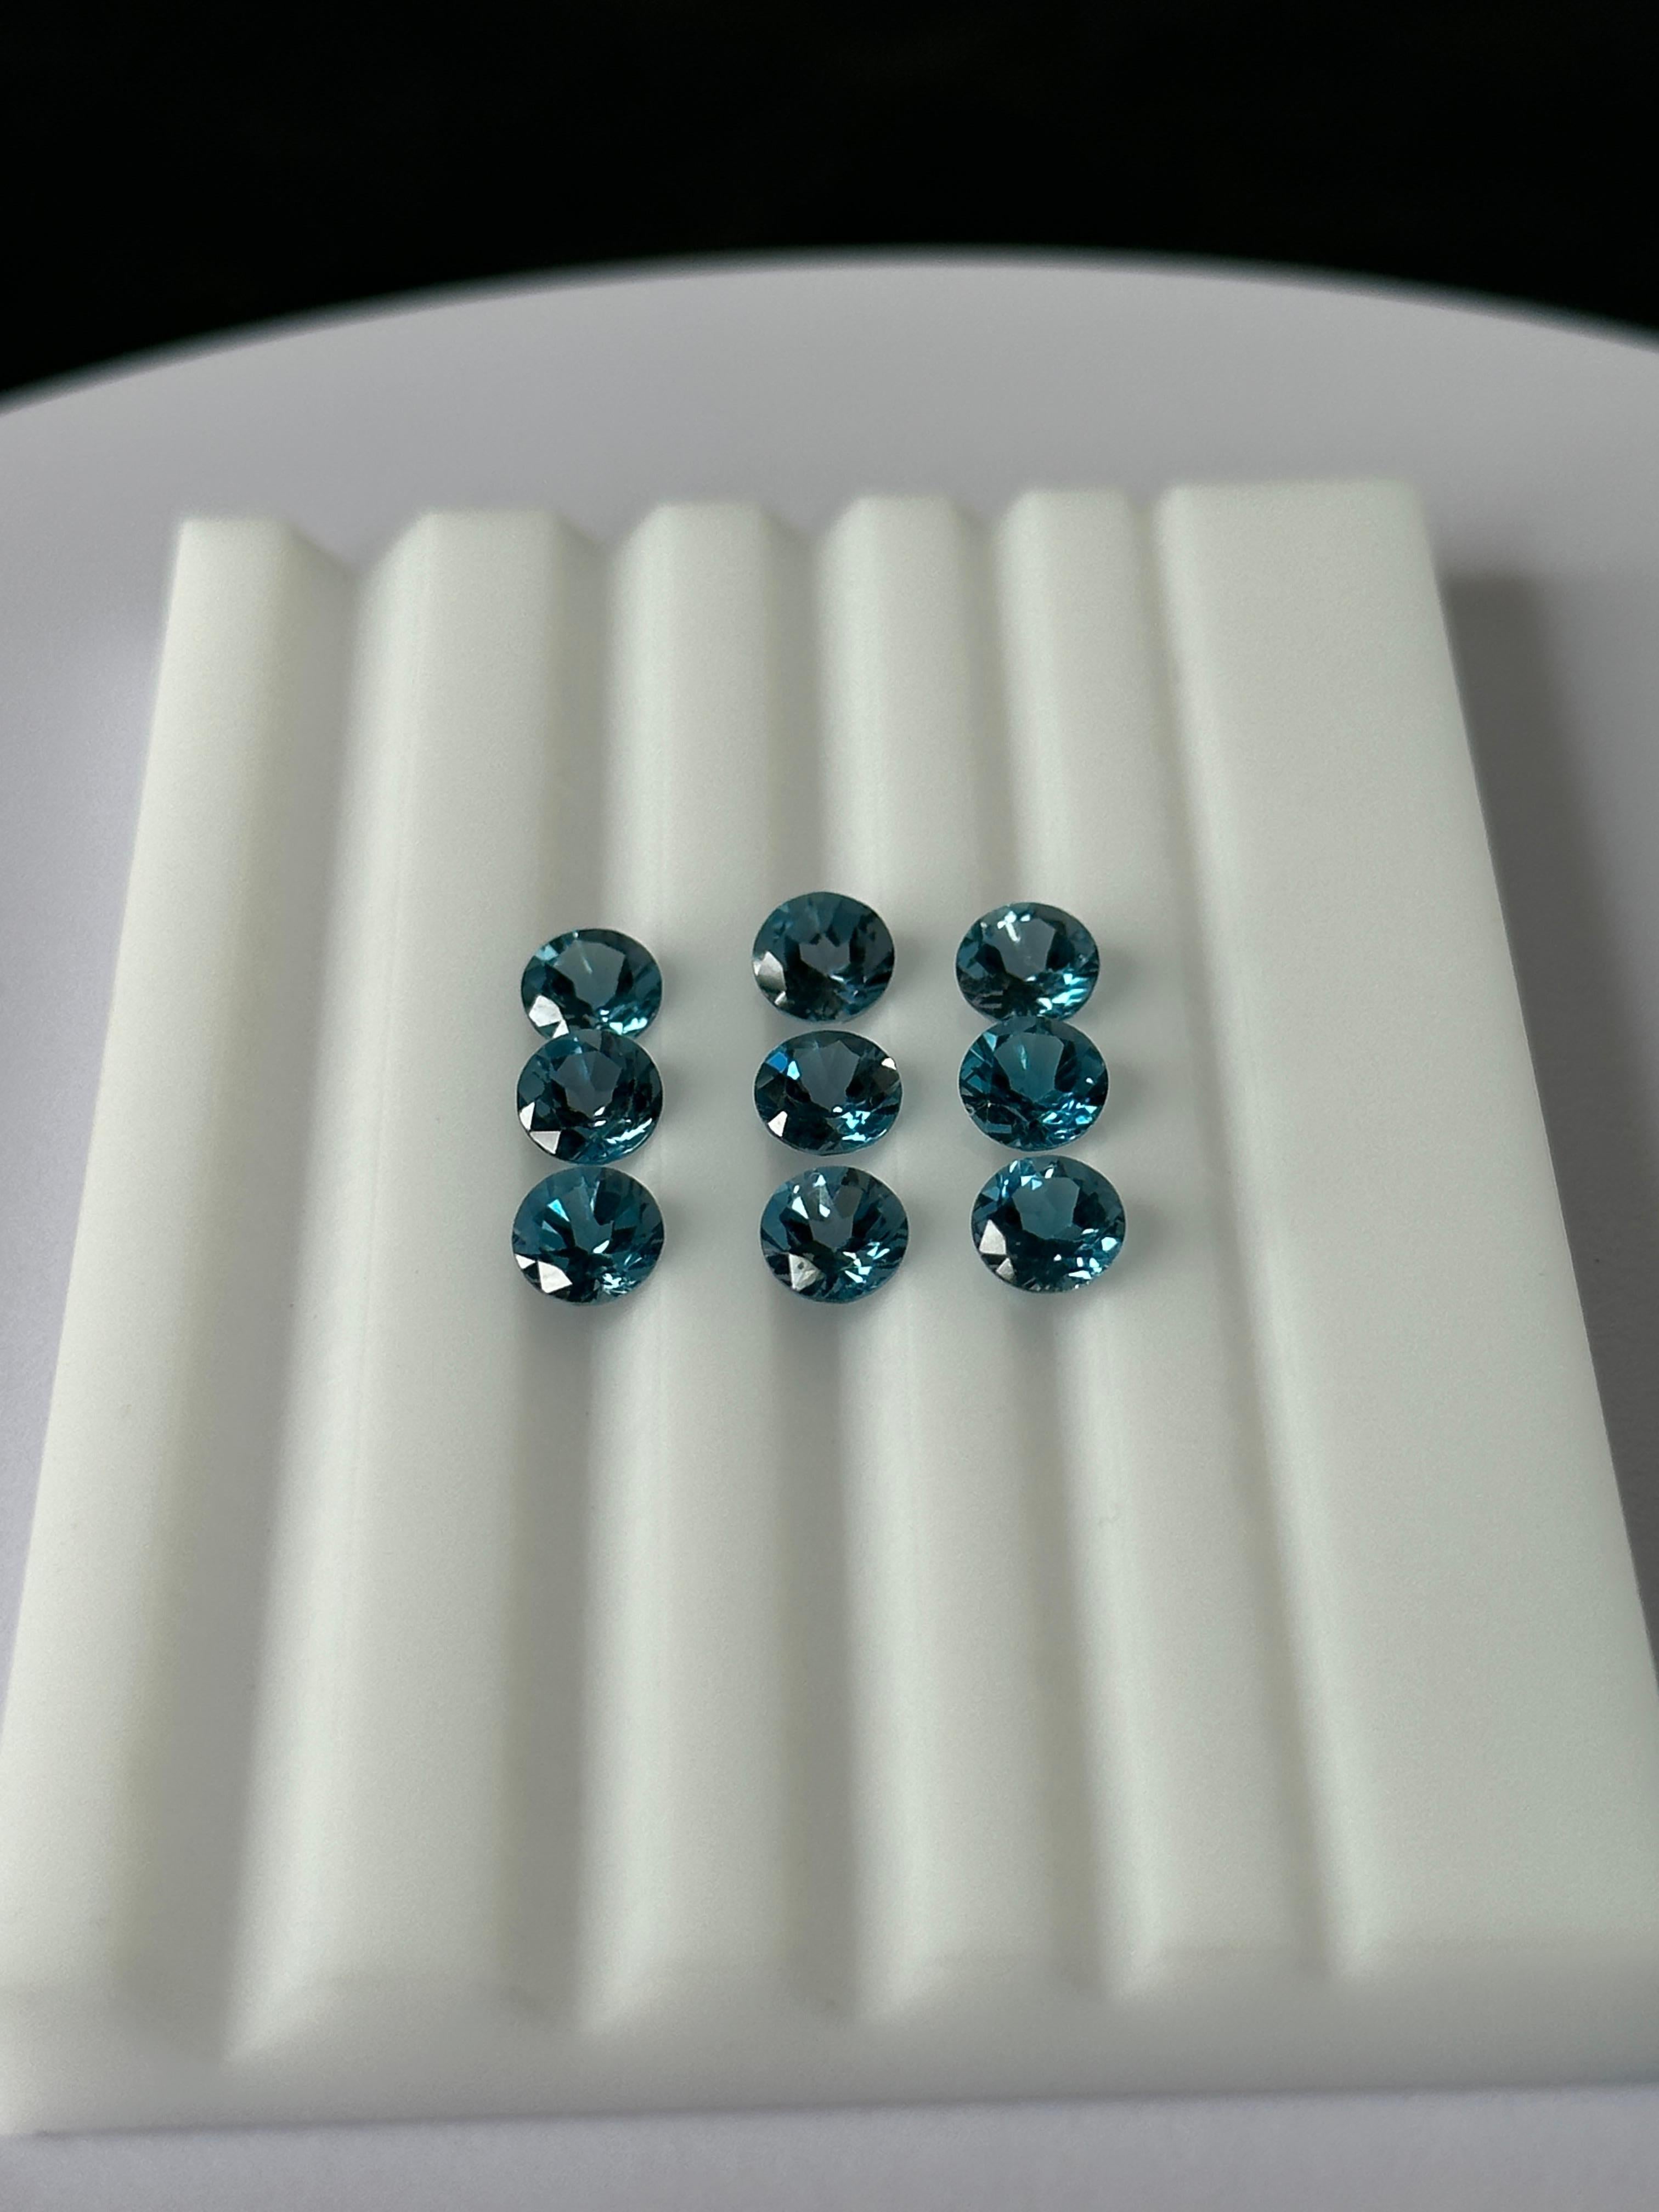 A Blue Topaz lot including 9 gems amounting to a total of 5.35 carats in weight.
These blue topazes fall into the London Blue category due to their darker tone and very slight greenish shade of blue.
Topaz is one of the most sought-out semiprecious